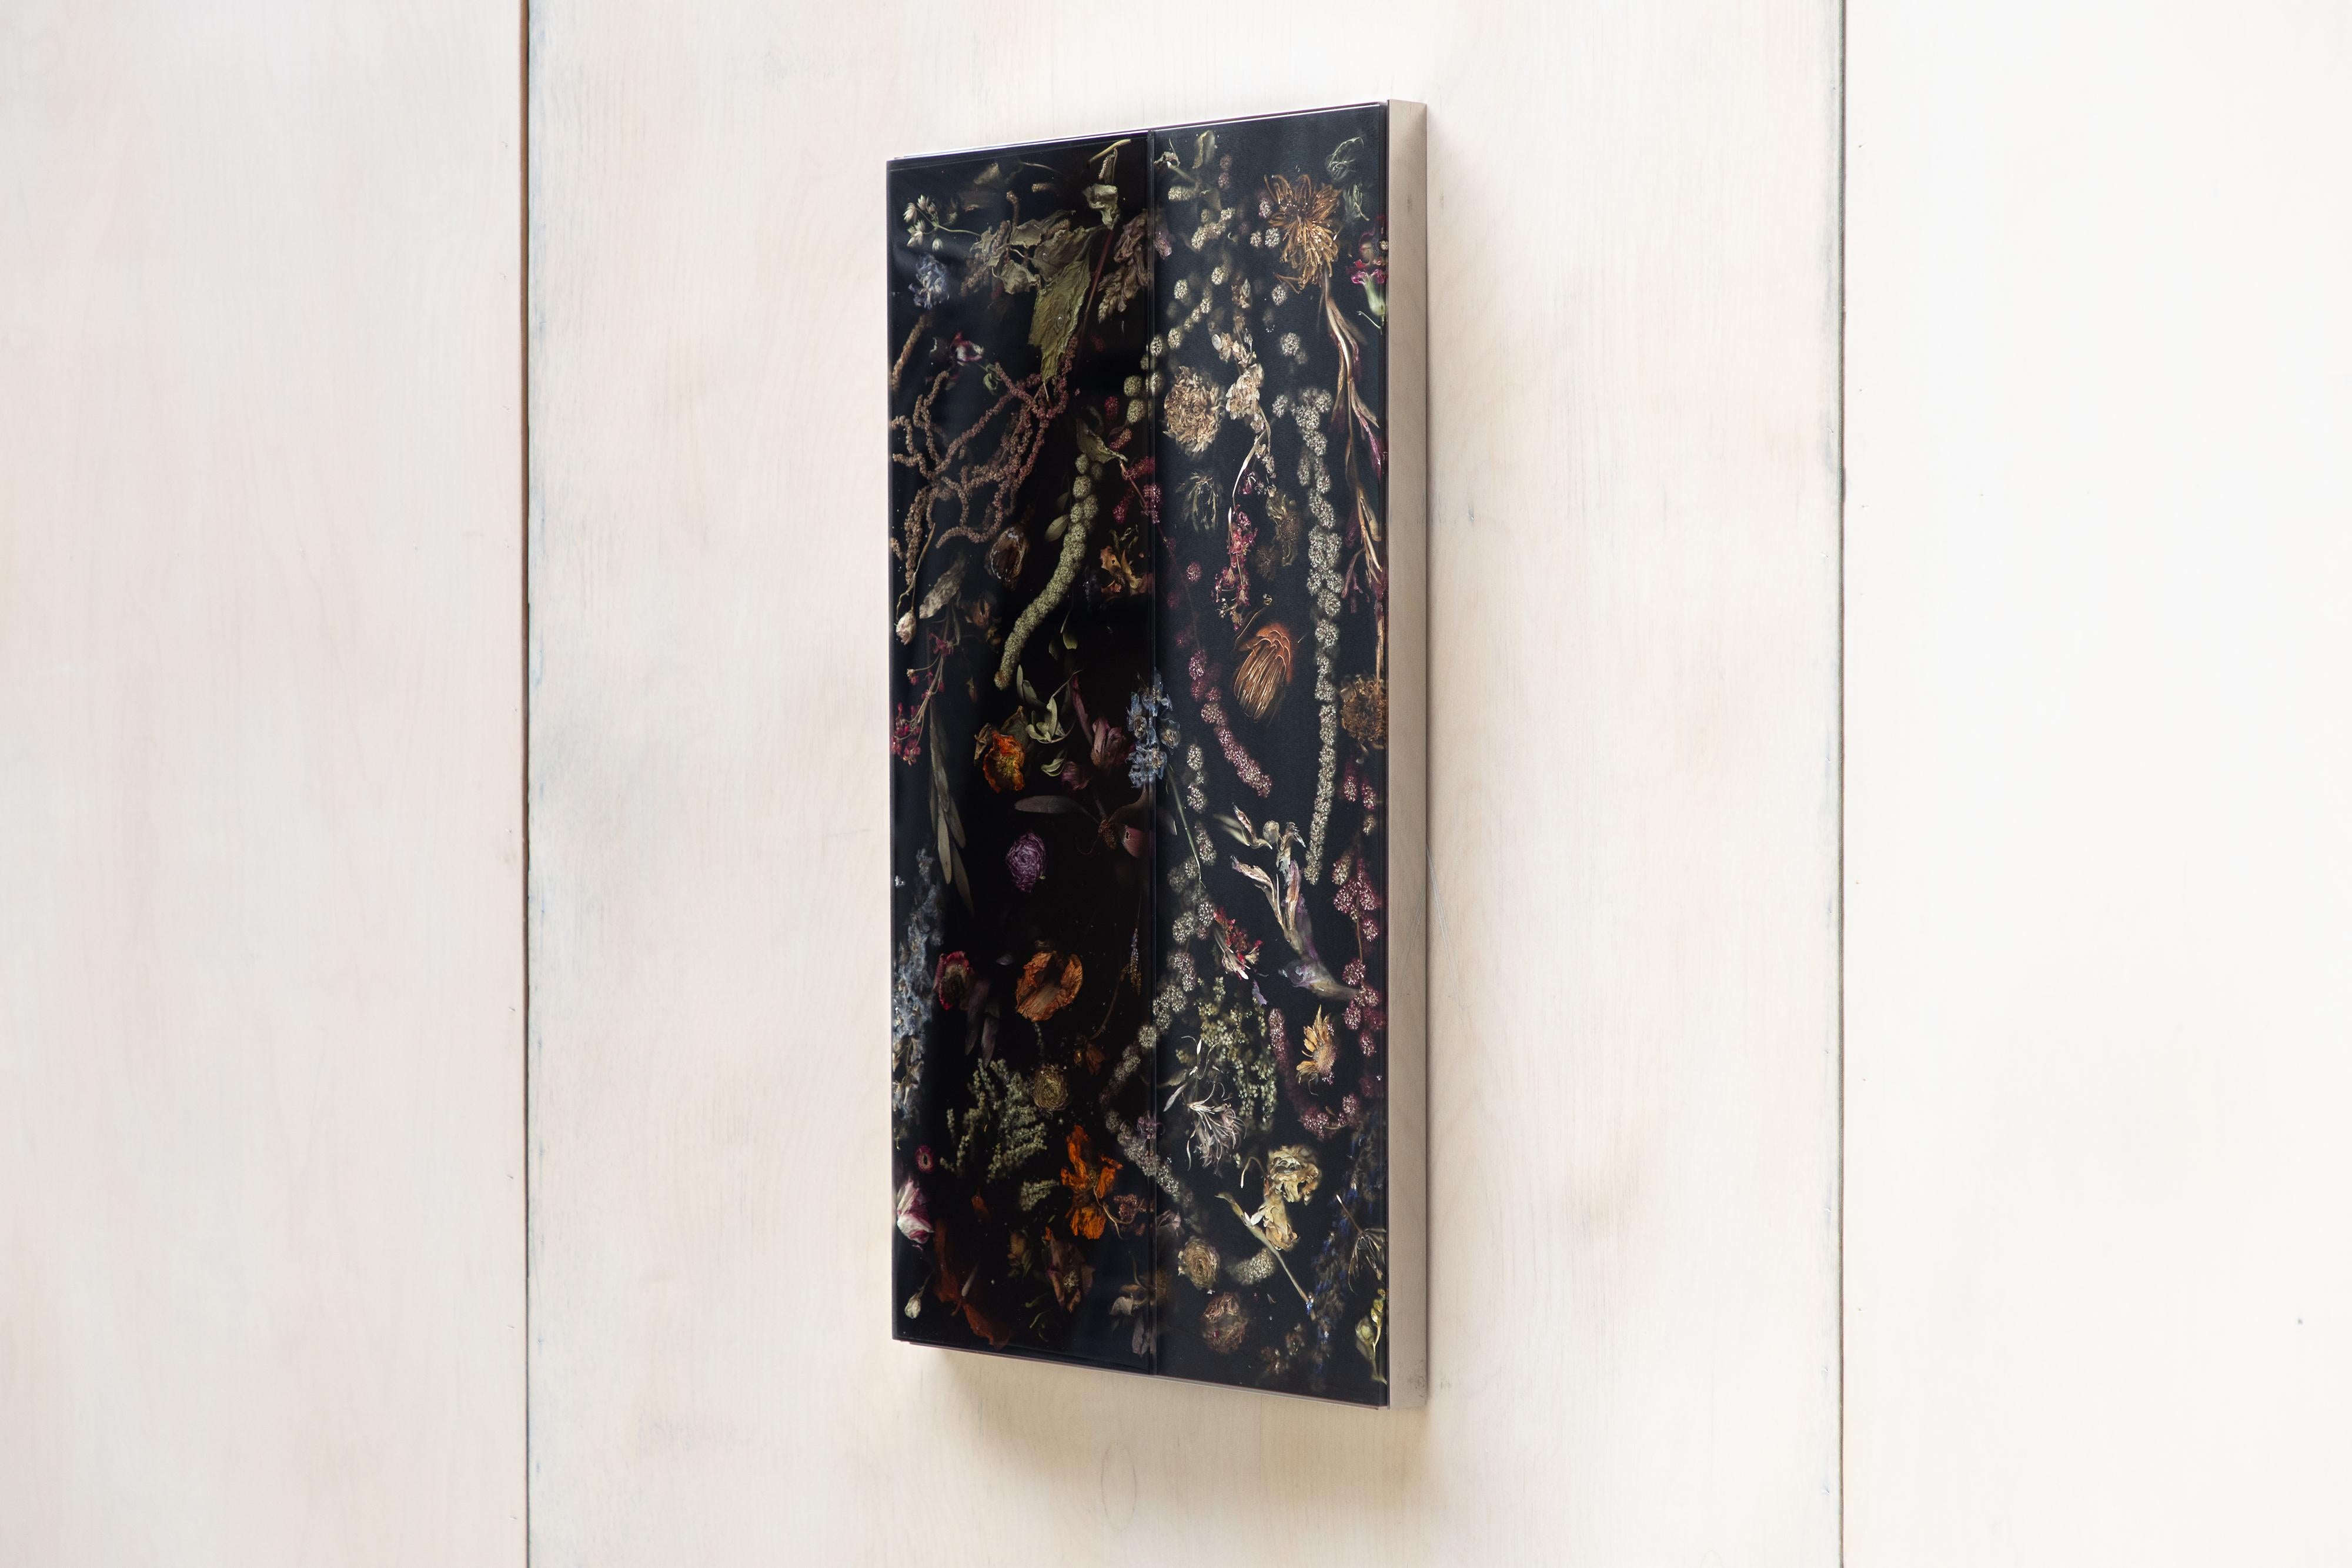 Part of Marcin Rusak’s signature Flora collection, Flora Wallhanging Piece 46 constitutes a unique decorative piece that works well in a variety of settings, from classic and romantic to modern and contemporary. Based on discarded flowers carefully